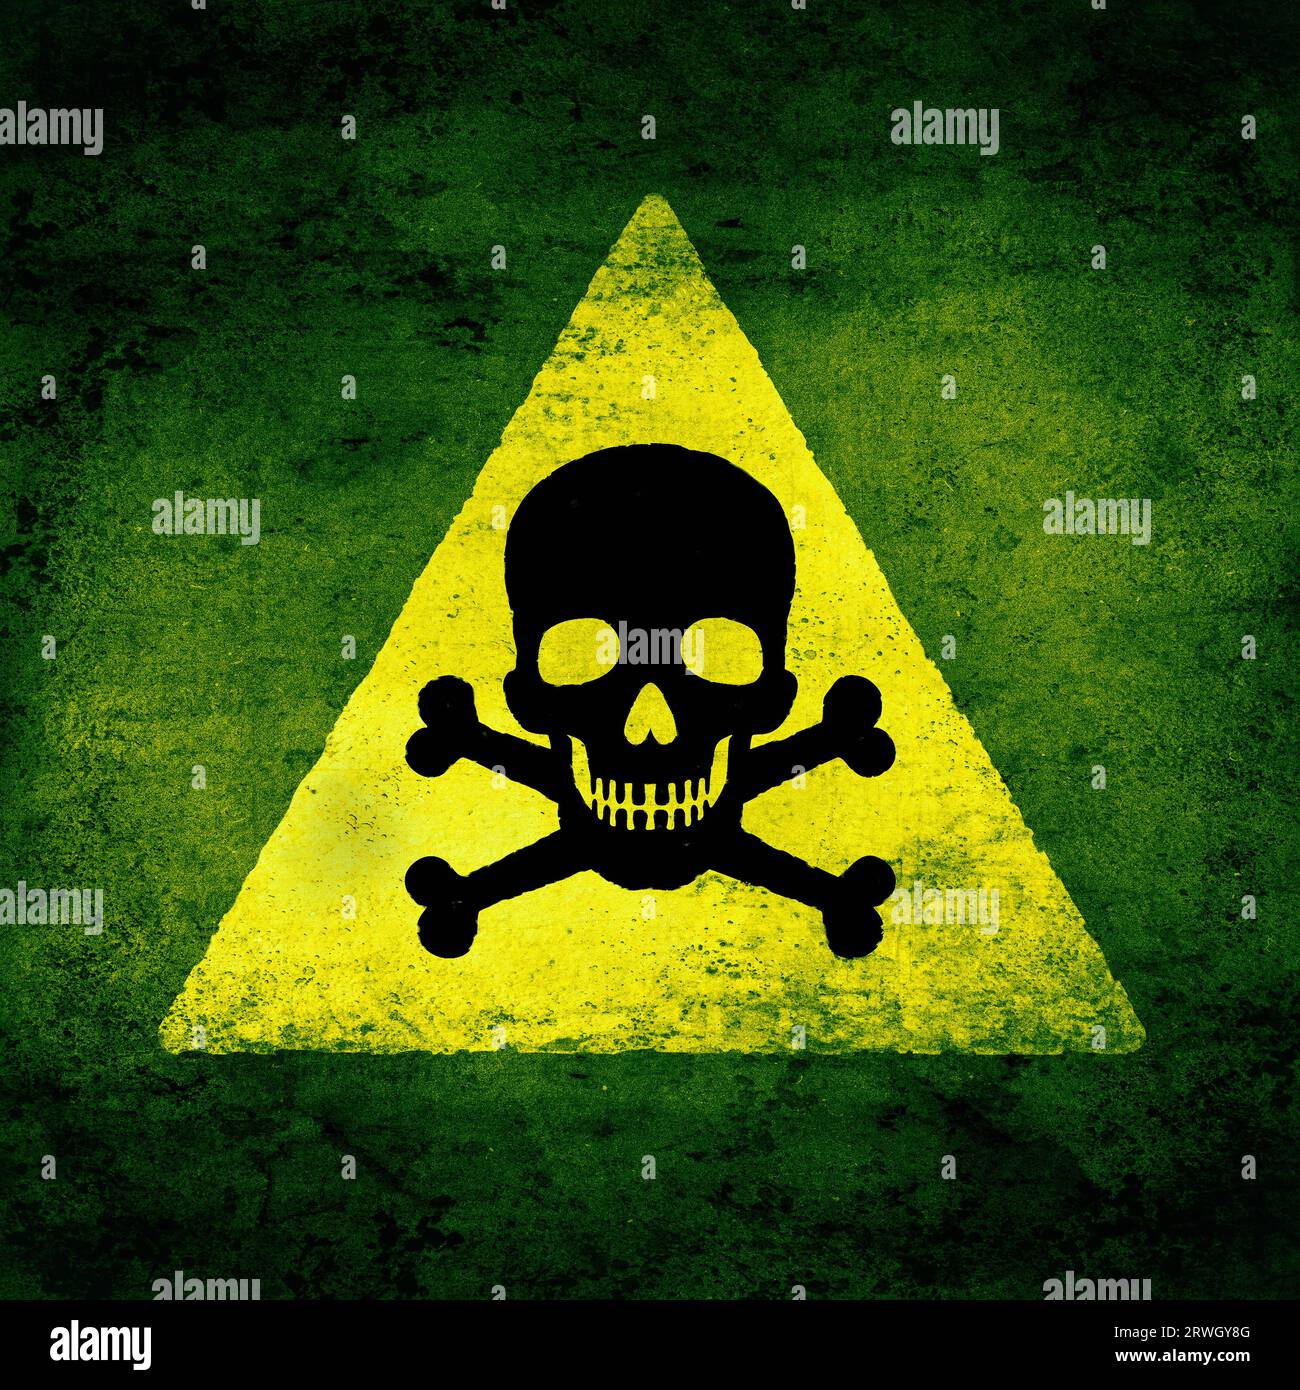 Skull and bones icon, yellow and black on green. Death threat sign, grunge textured Stock Photo